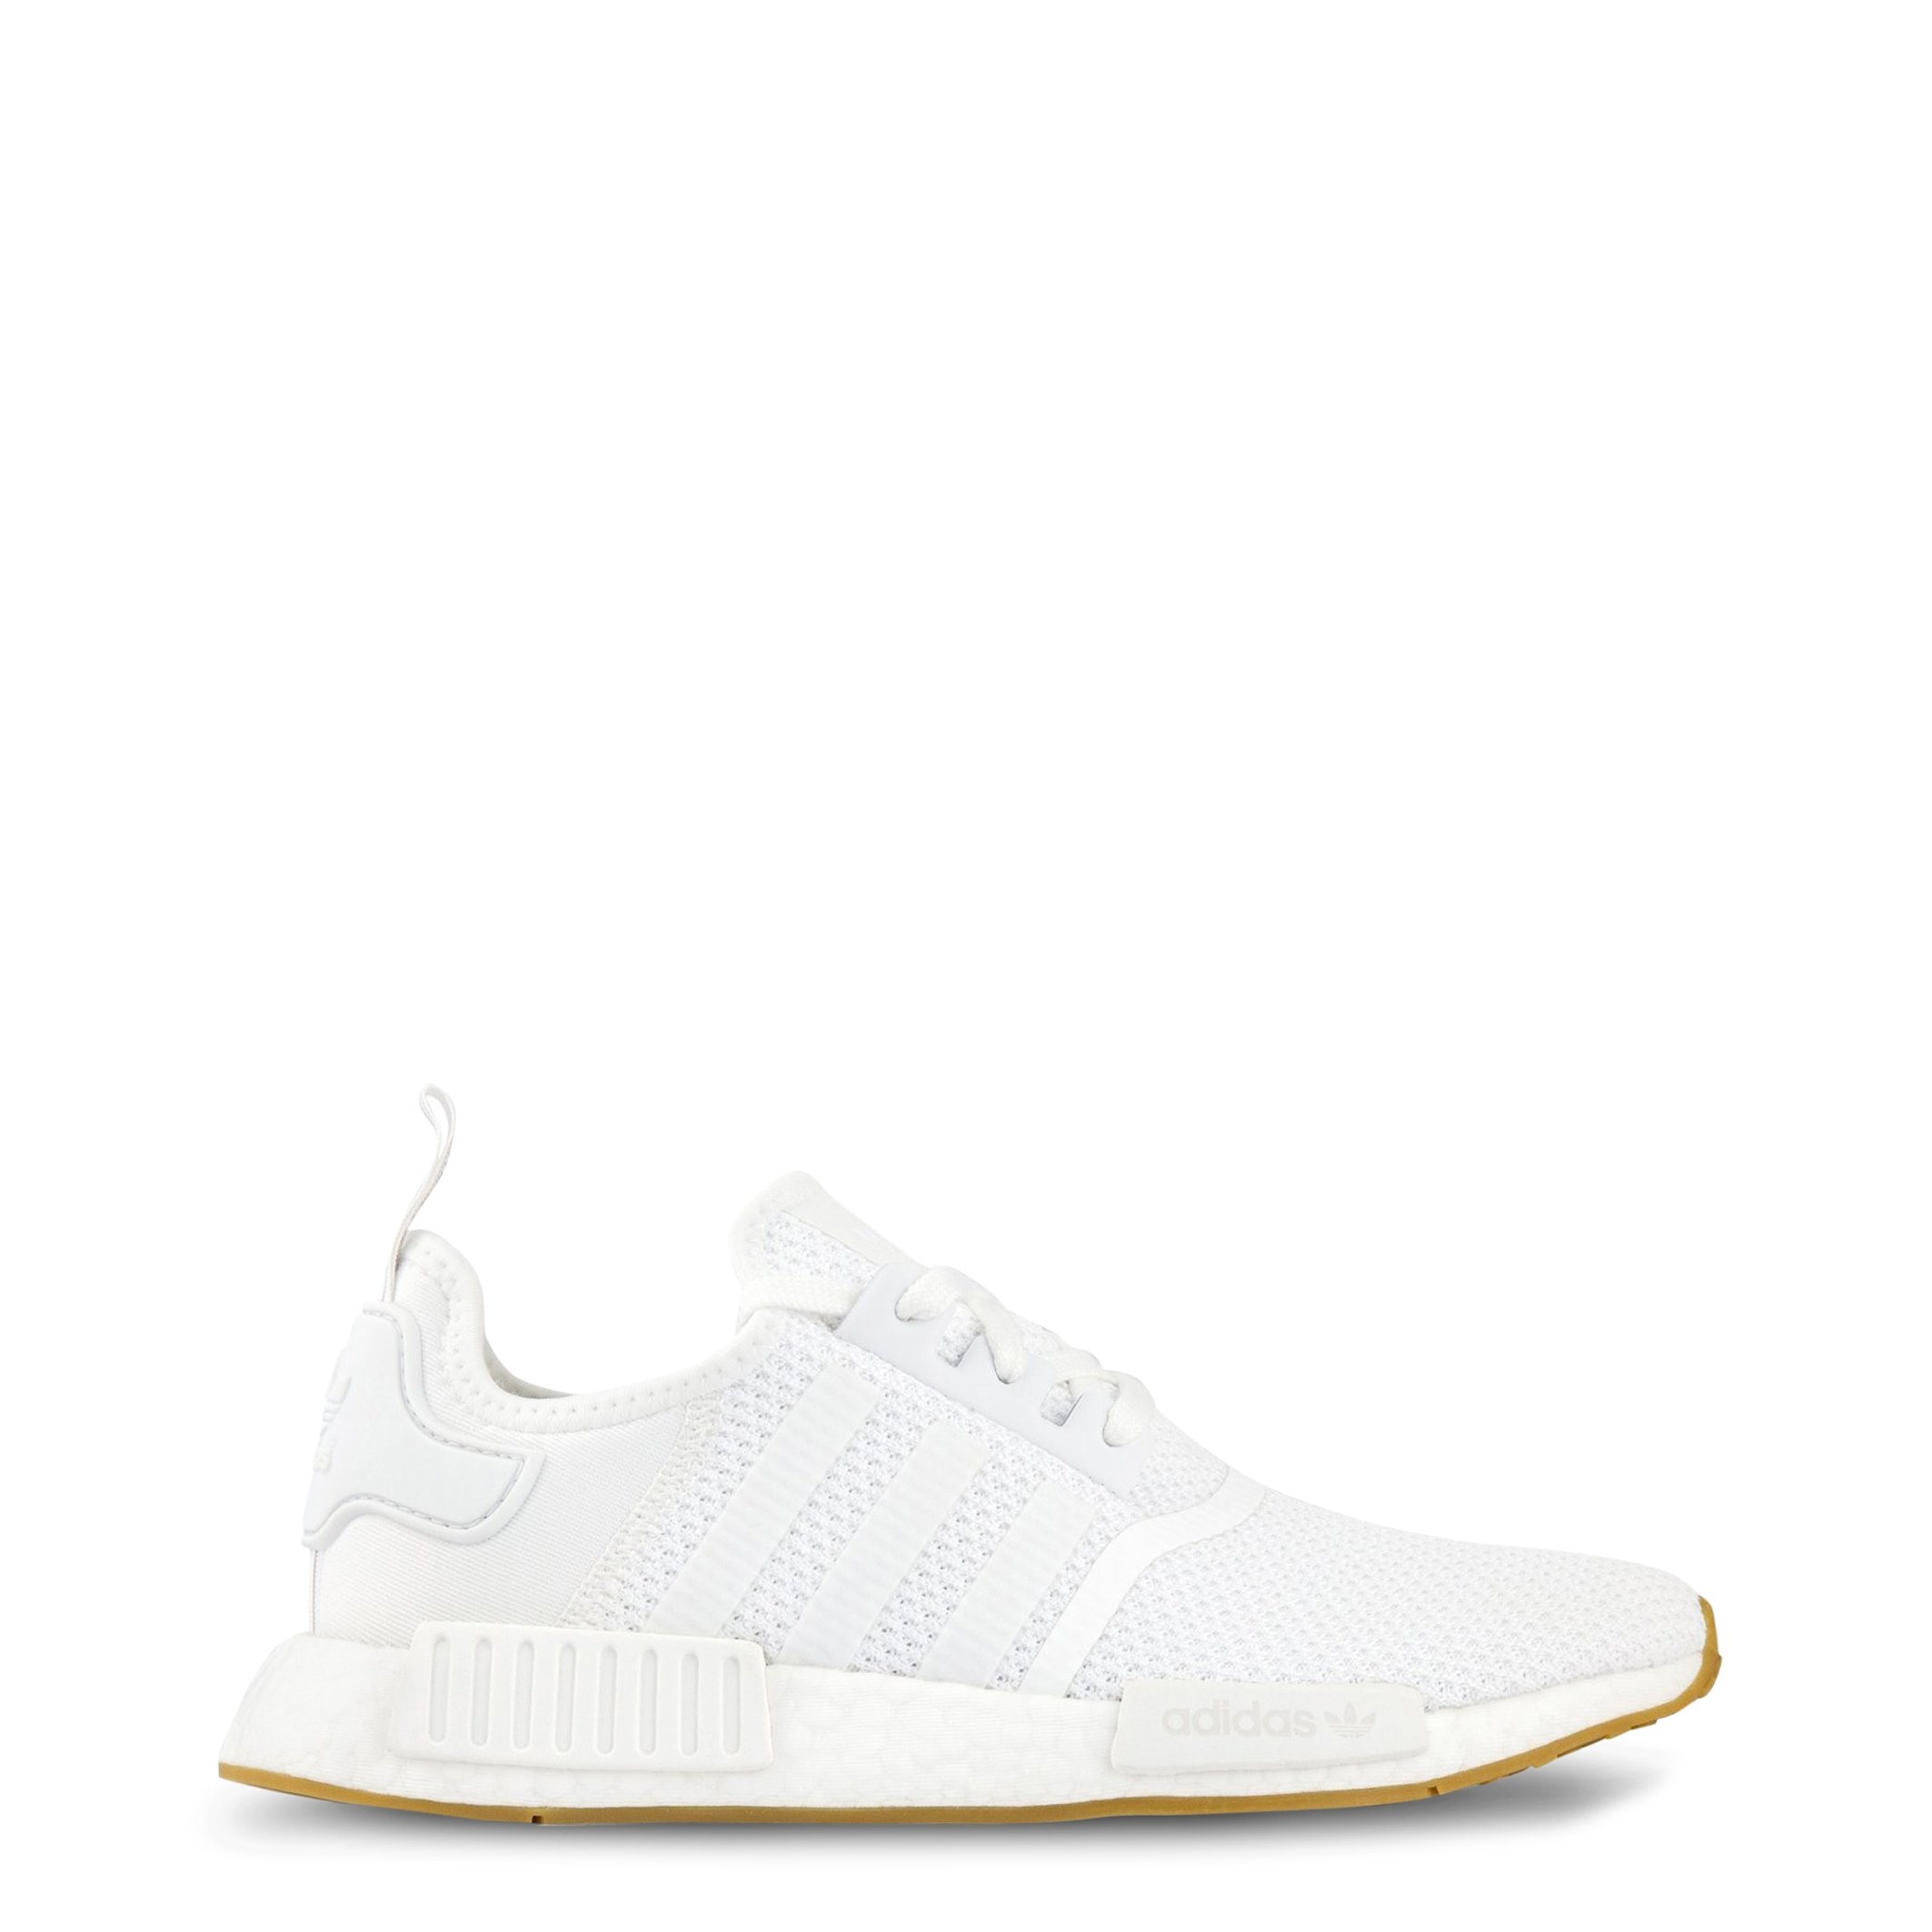 Adidas – NMD-R1_STLT – Shoes Sneakers – White / Uk 6.5 – Love Your Fashion